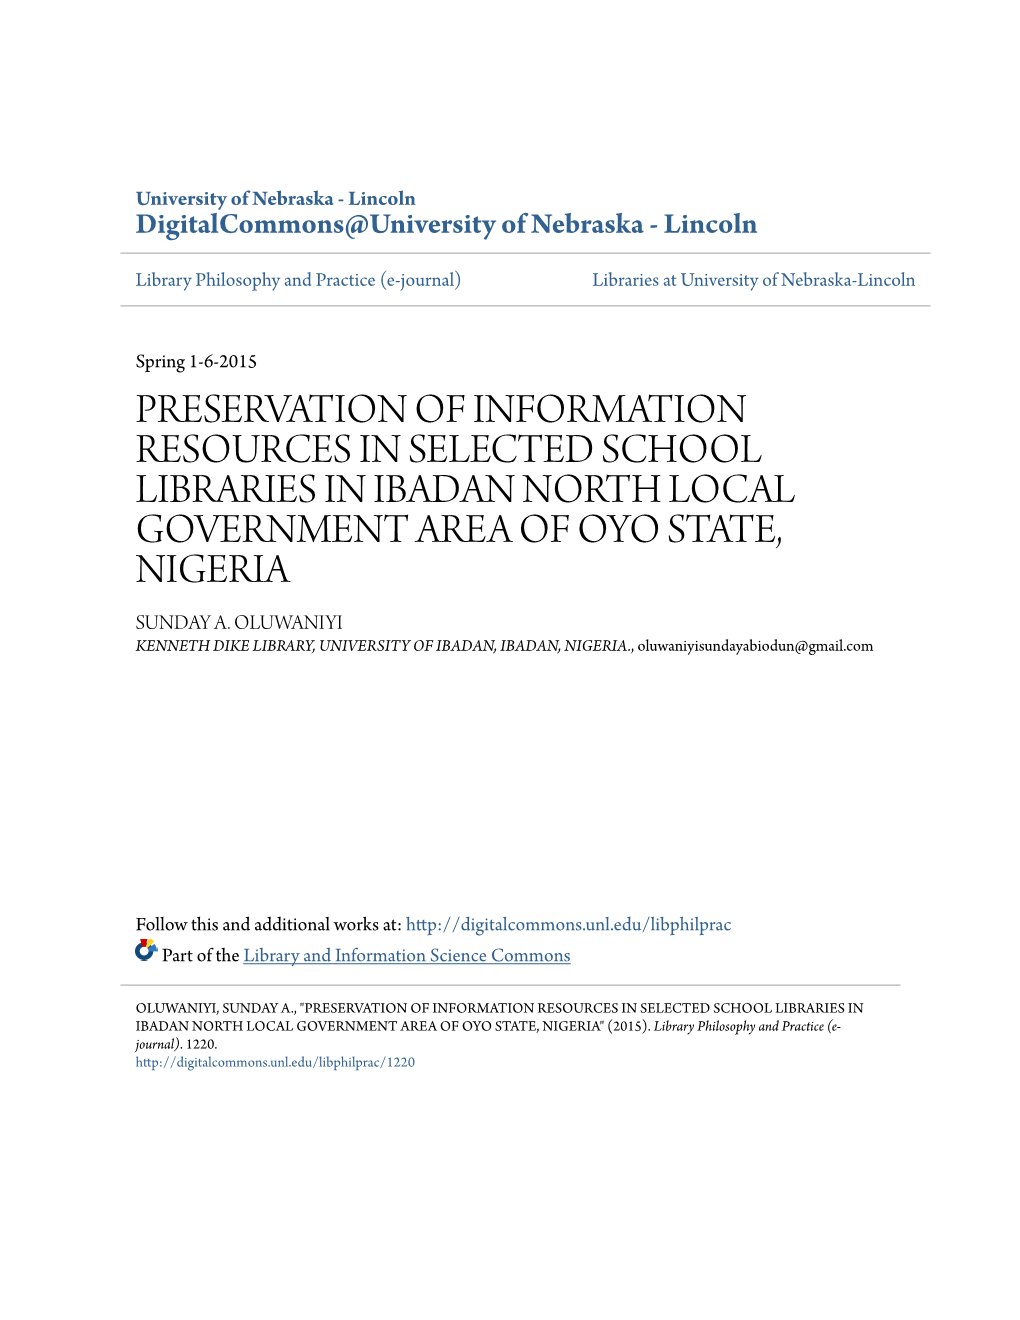 Preservation of Information Resources in Selected School Libraries in Ibadan North Local Government Area of Oyo State, Nigeria Sunday A